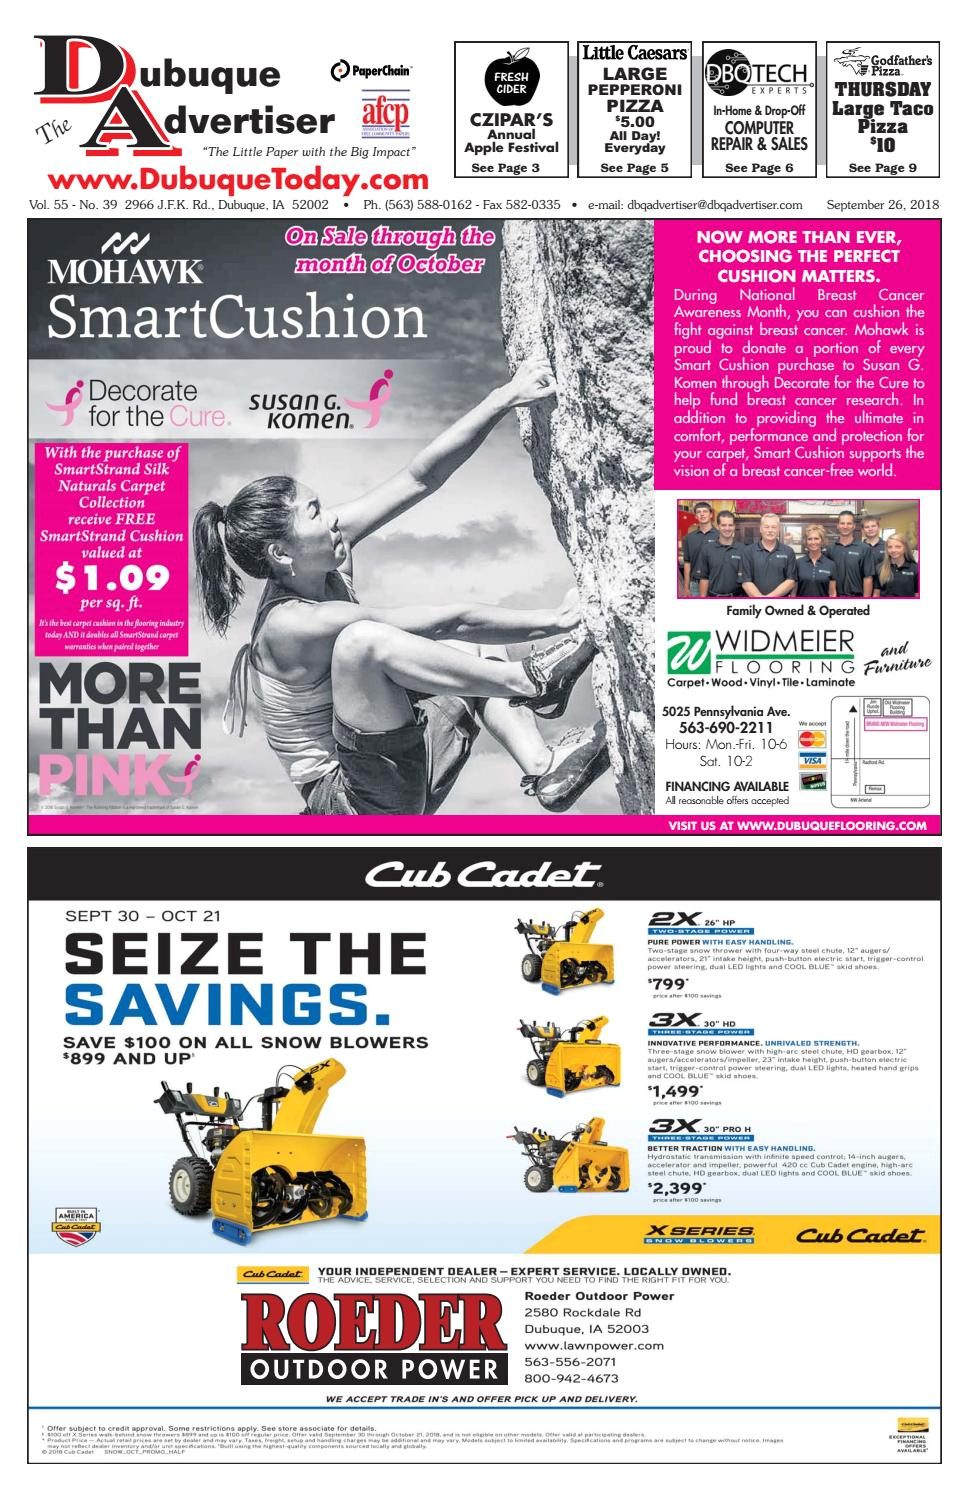 the dubuque advertiser september 26 2018 by the dubuque advertiser issuu